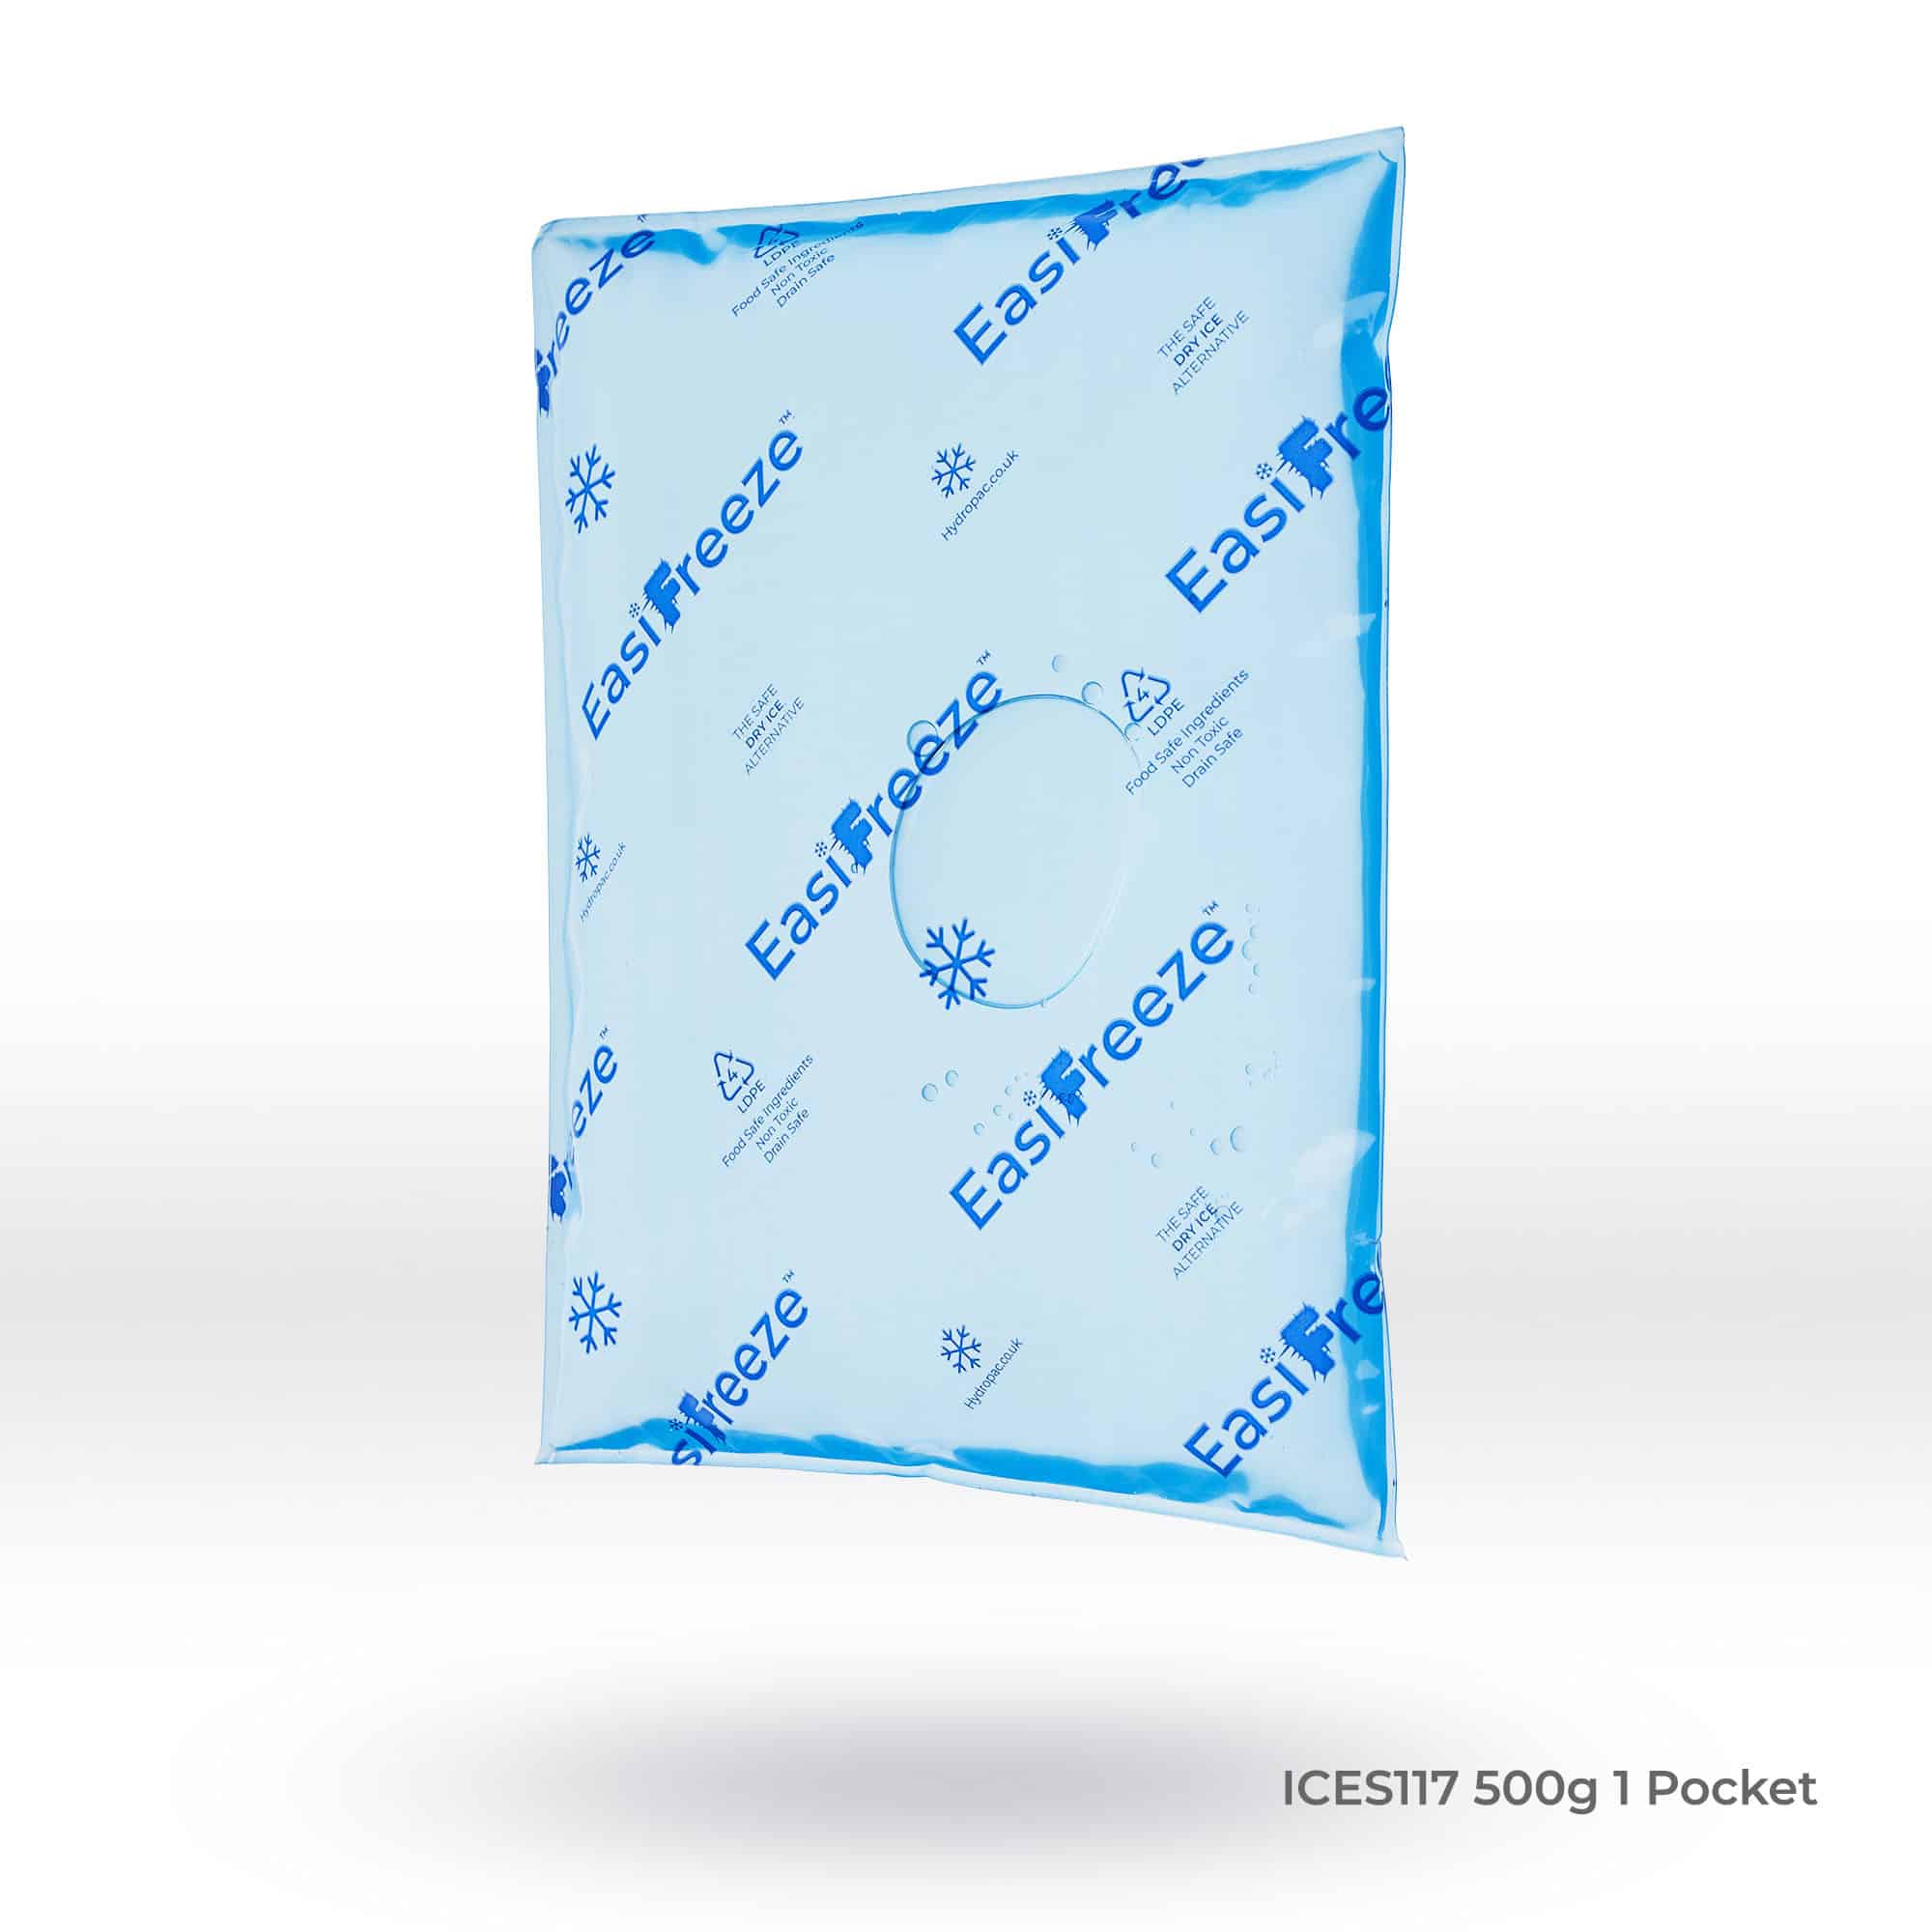 ICES117-EasiFreeze-500g-1-Pocket-Square-LR-with-Text.jpg